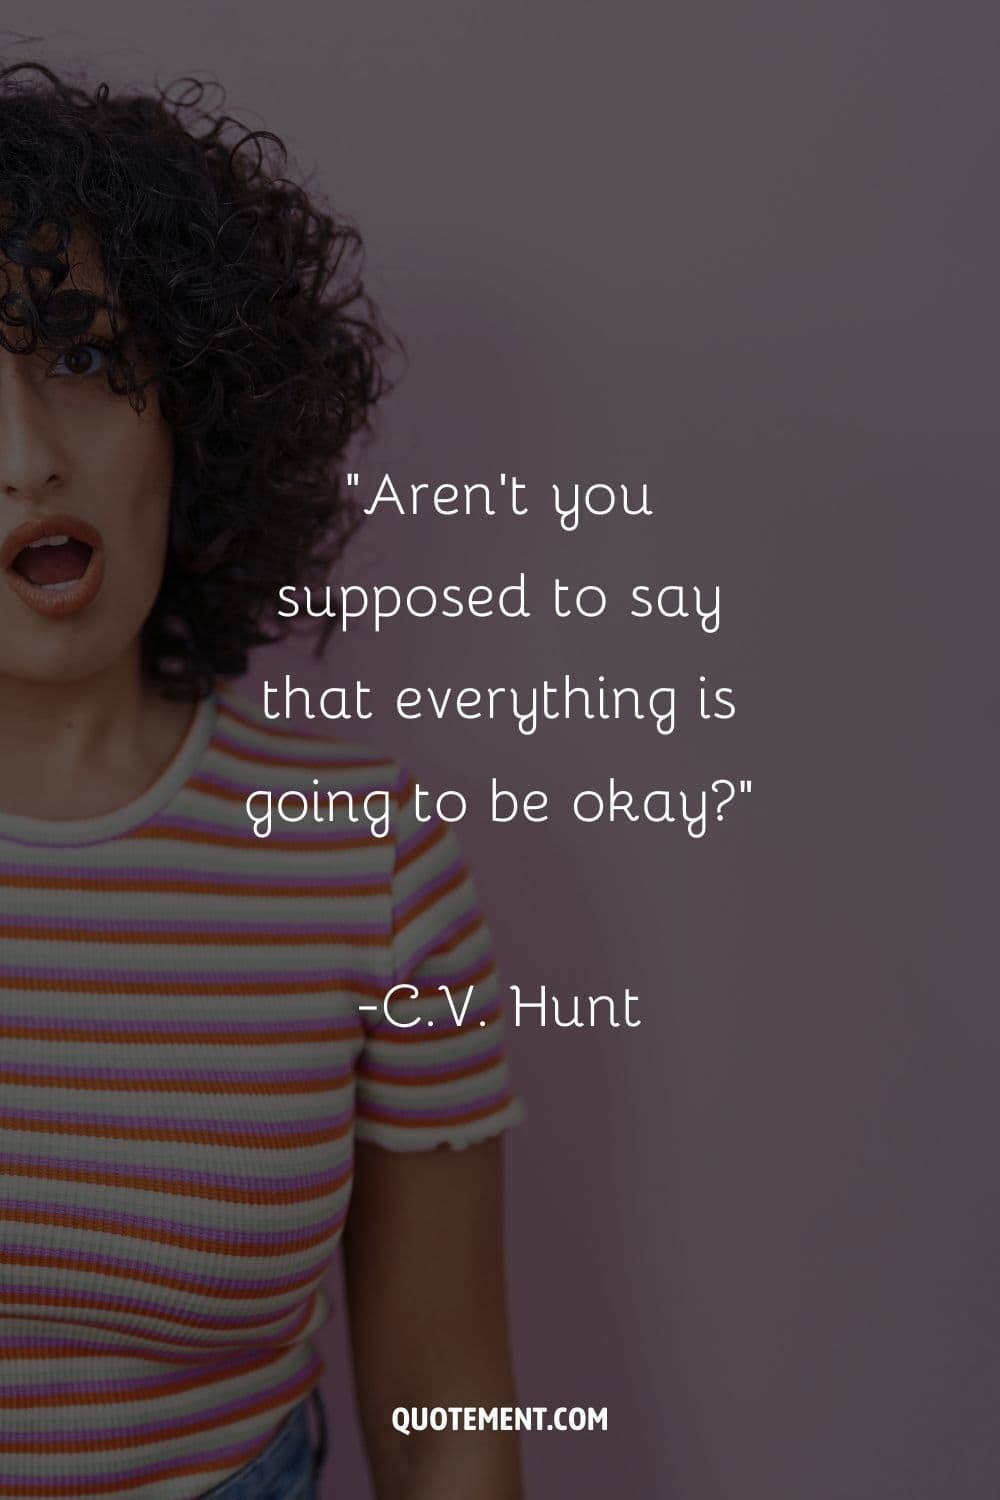 “Aren't you supposed to say that everything is going to be okay” ― C.V. Hunt, Legacy